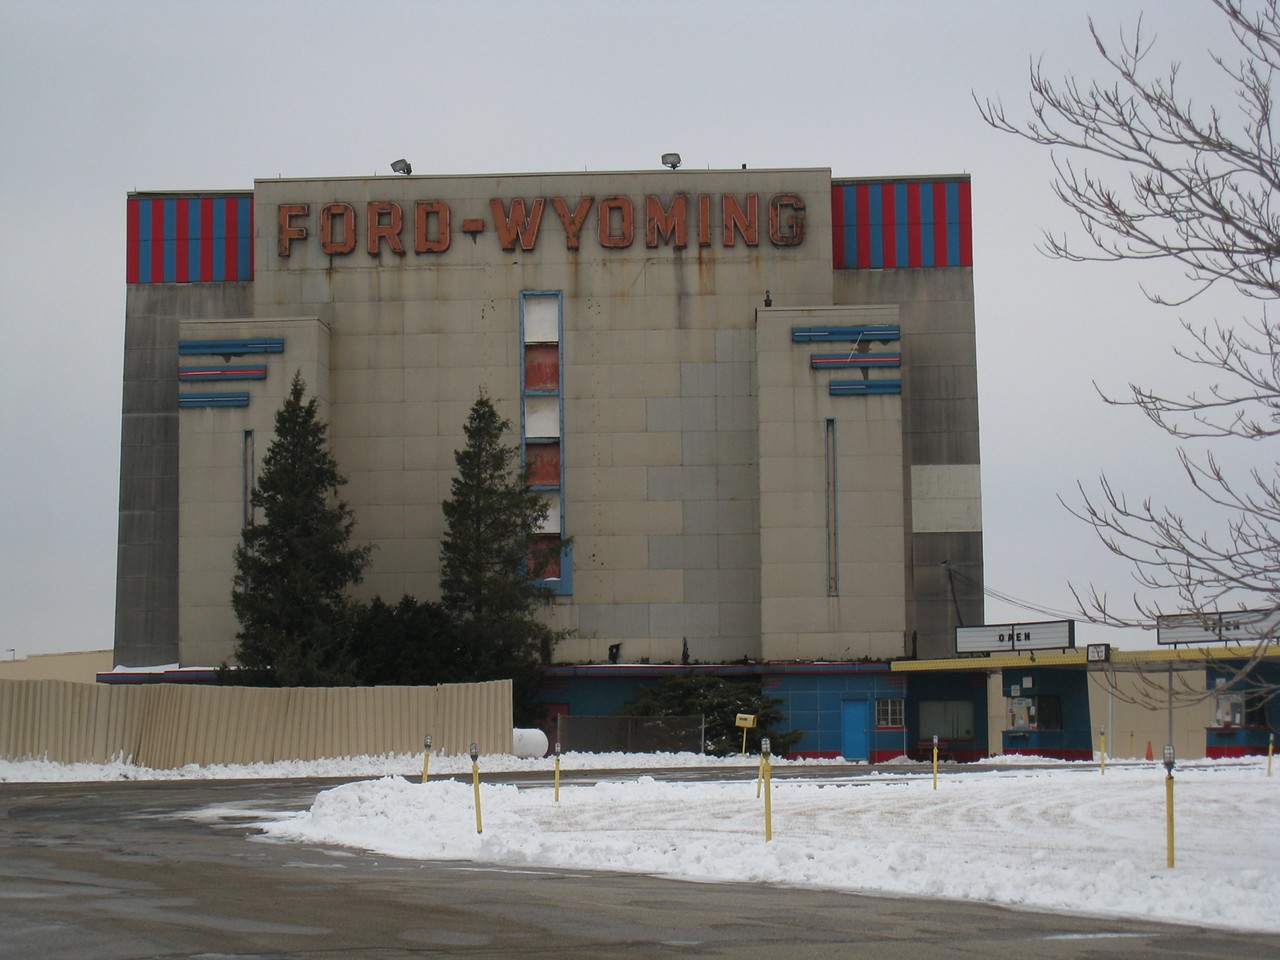 
See a drive-in movie 
Cuddle up with your boo in the car for a double feature at the Ford-Wyoming Drive-In (10400 Ford Rd., Dearborn; forddrivein.com), a metro Detroit tradition since 1950.
